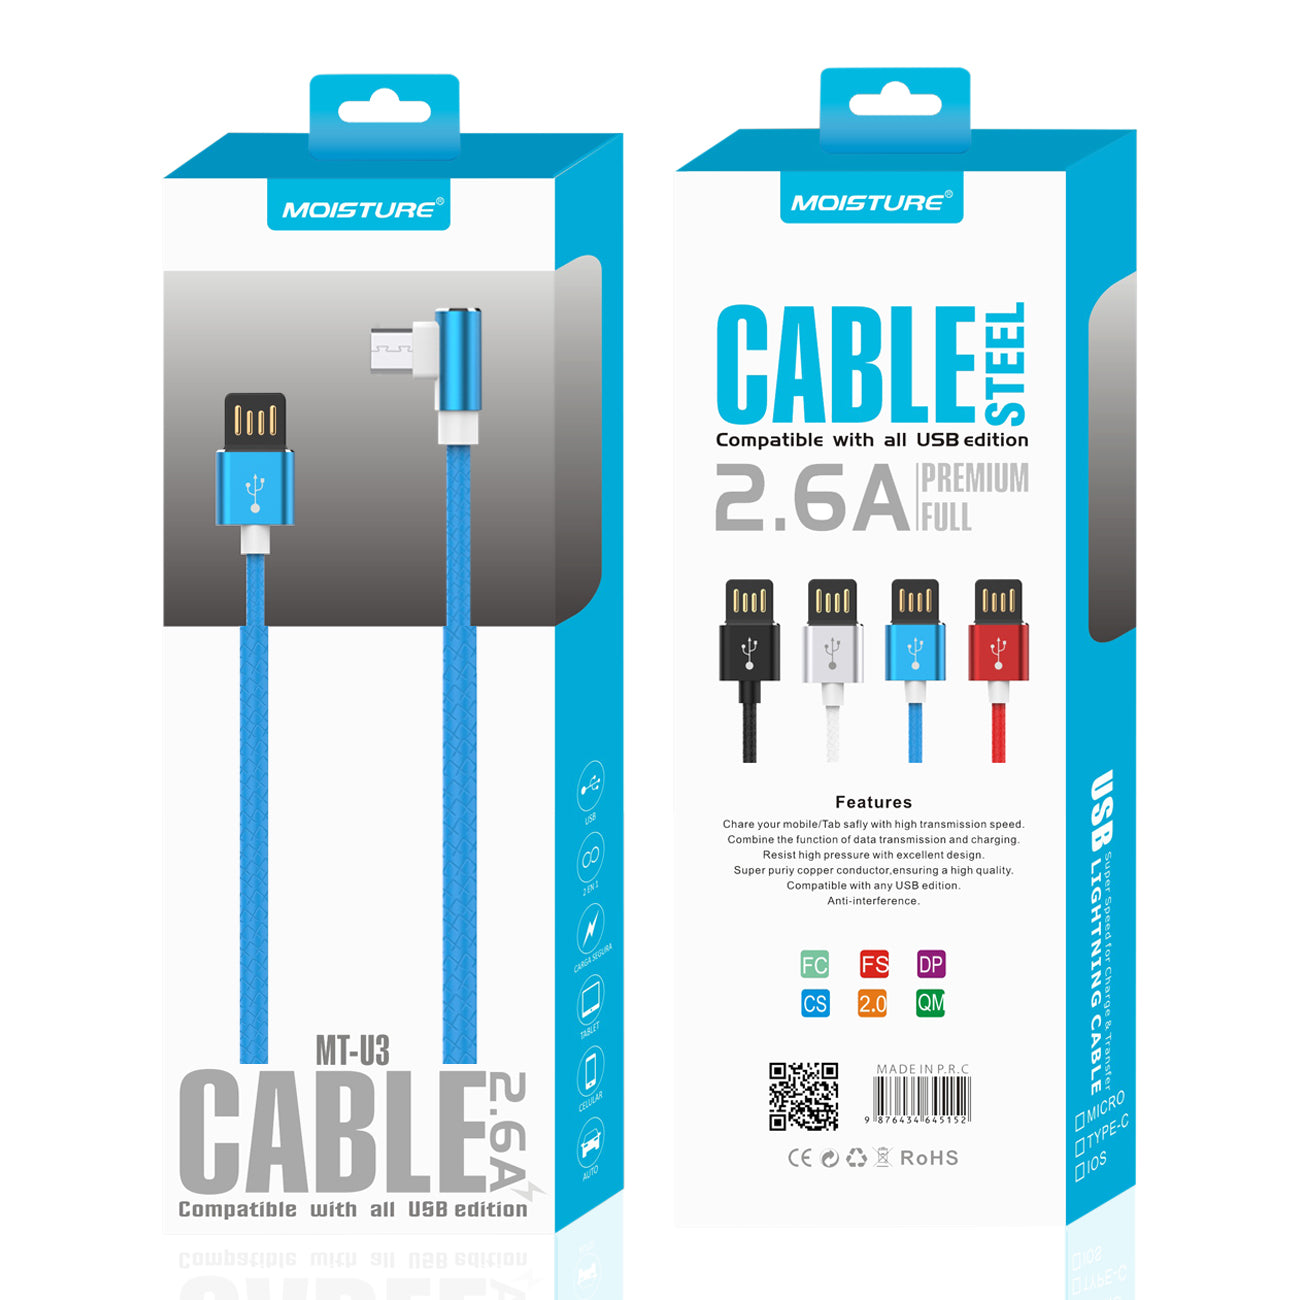 Moisture 2.6A Premium Full Steel USB To Micro Cable In Blue